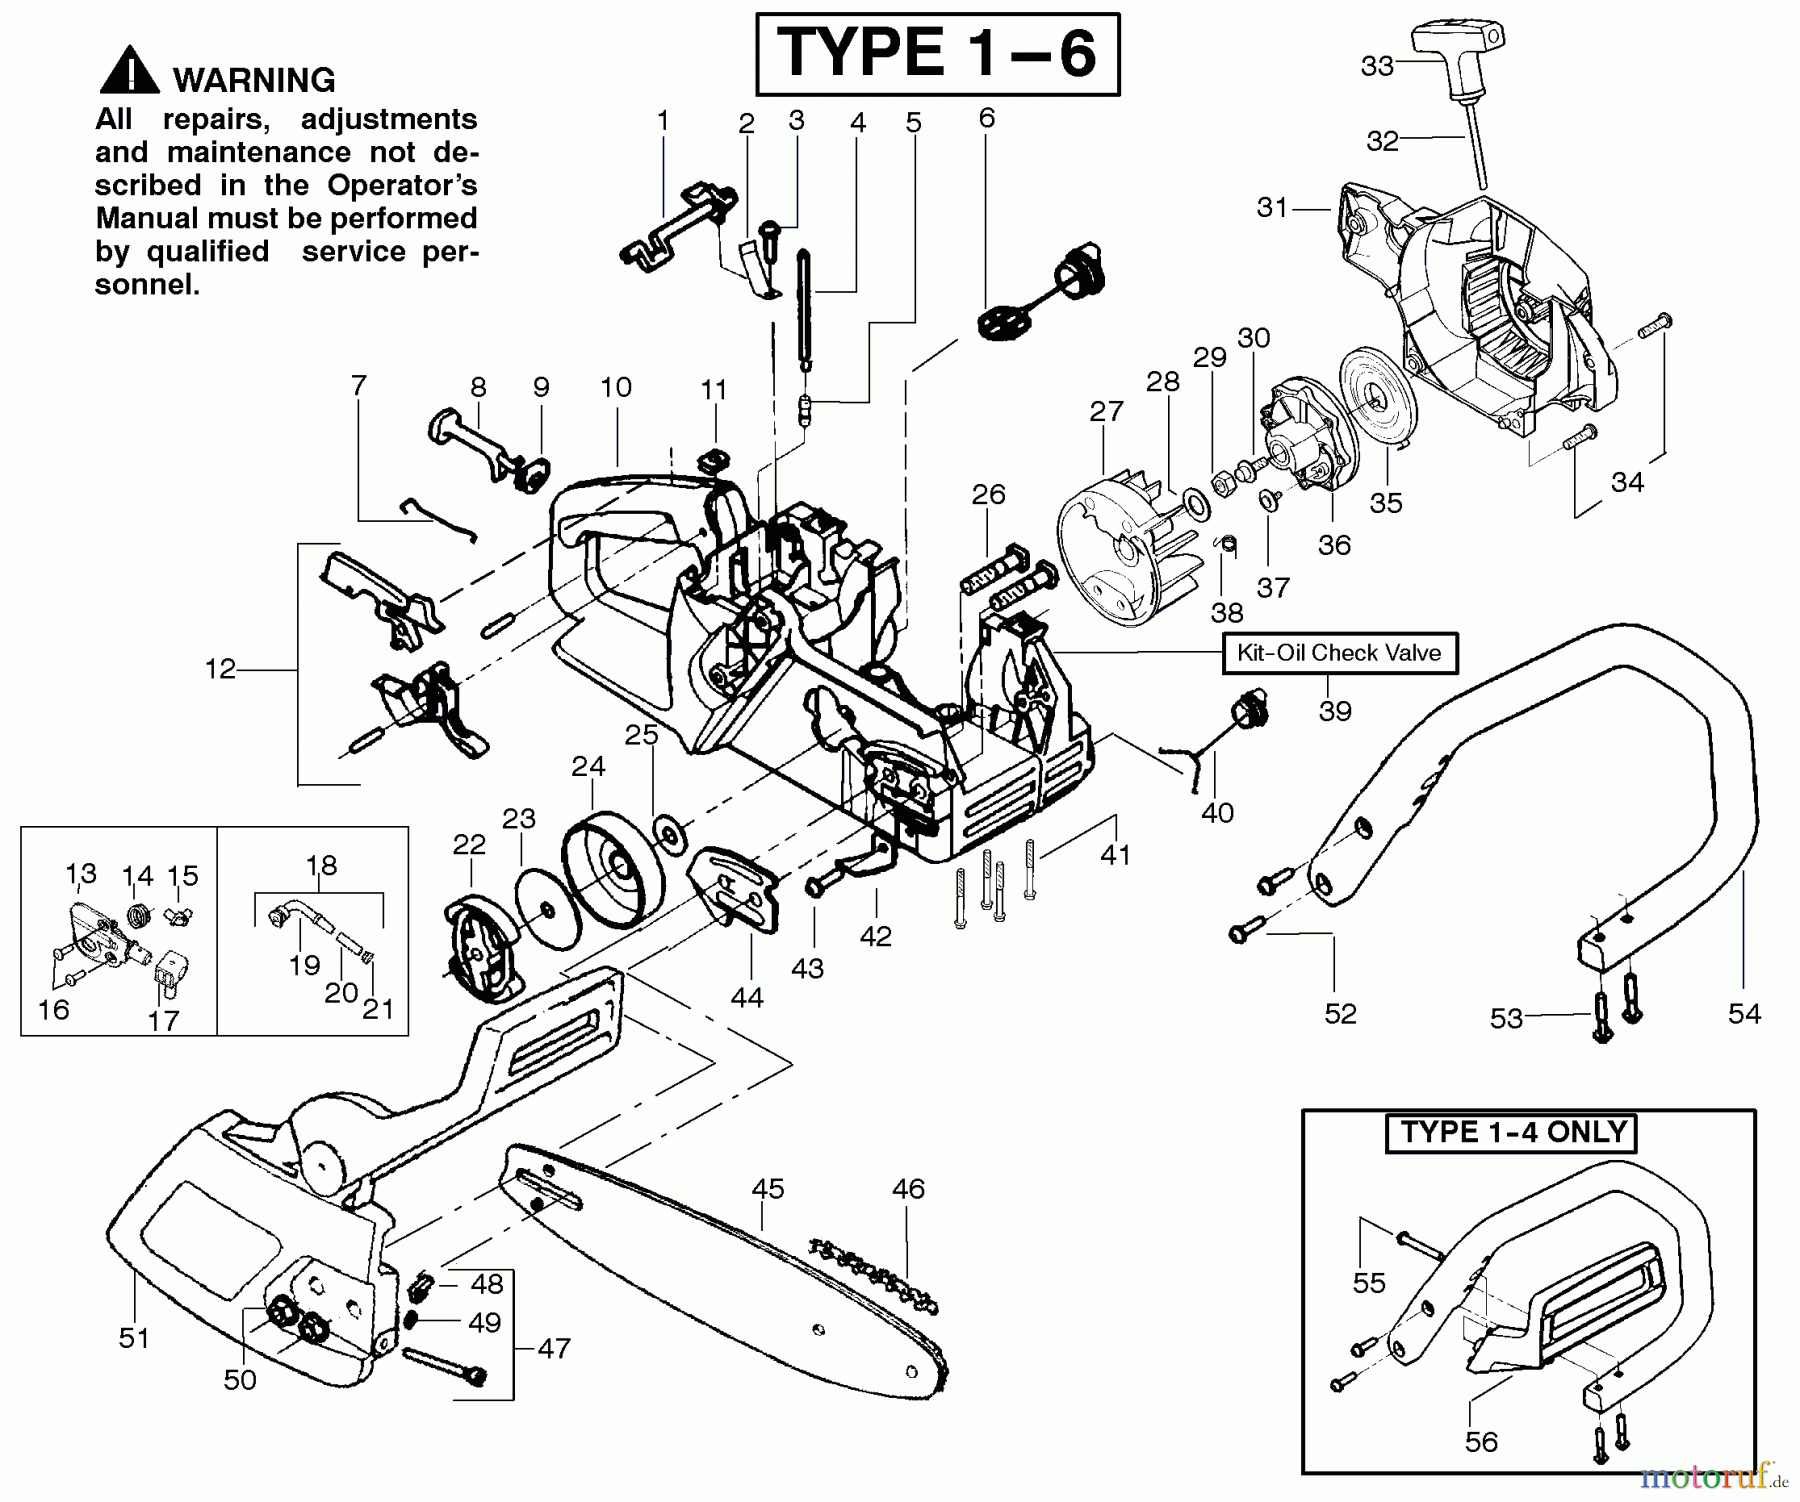  Poulan / Weed Eater Motorsägen 2050 (Type 3) - Poulan Pioneer Chainsaw Handle, Chassis & Bar Assembly Type 1-6